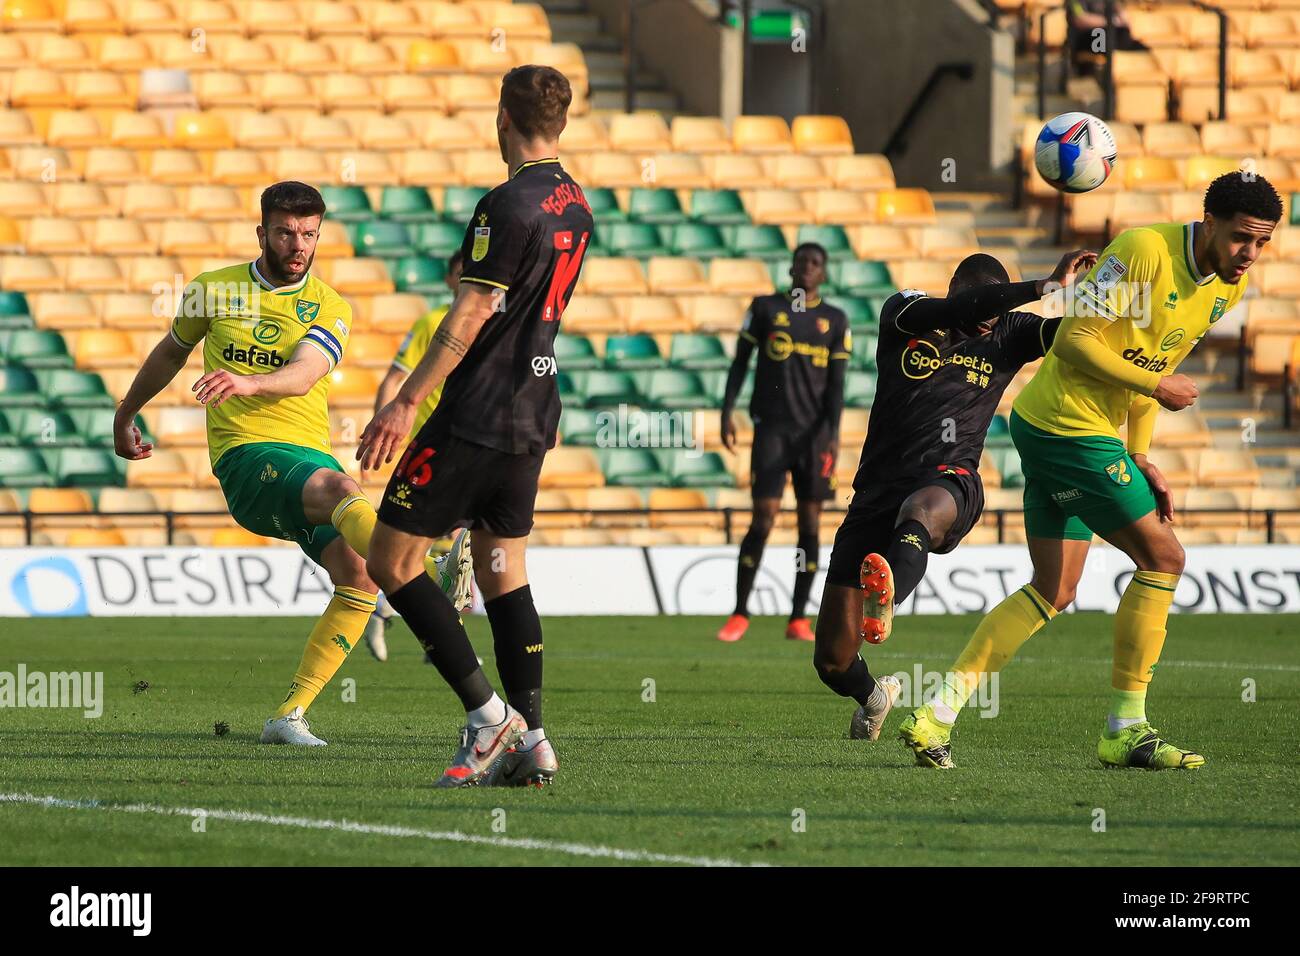 Grant Hanley #5 of Norwich City clears the ball from this area in, on 4/20/2021. (Photo by Mark Cosgrove/News Images/Sipa USA) Credit: Sipa USA/Alamy Live News Stock Photo